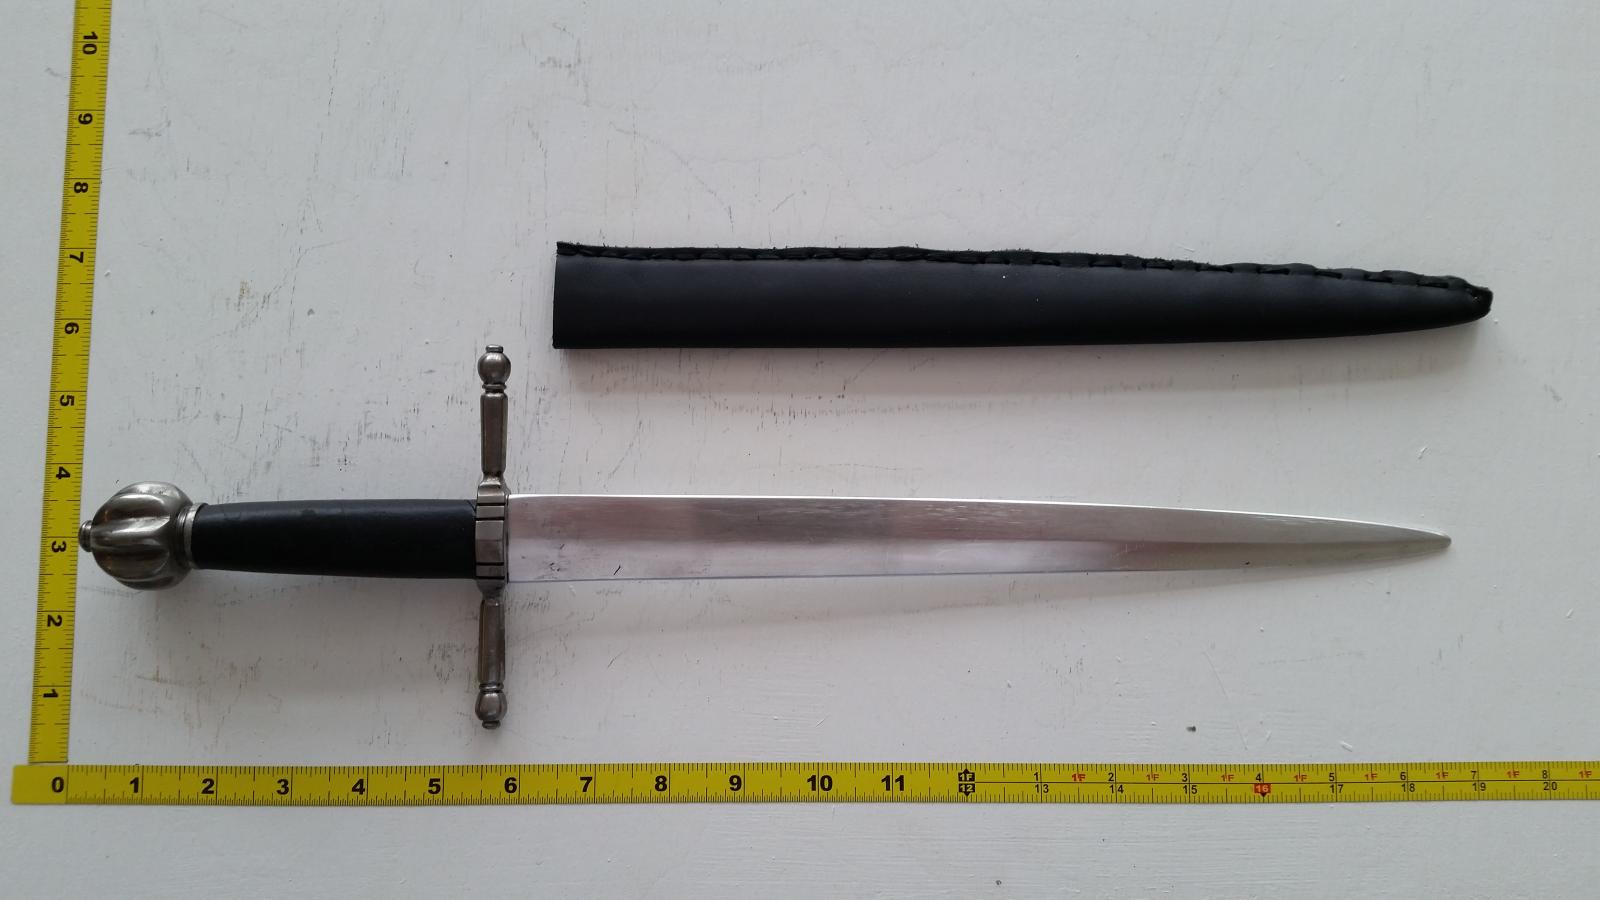 Large, Mediumweight English Dagger with Sheath - NOT approved for blade-to-blade stage combat.